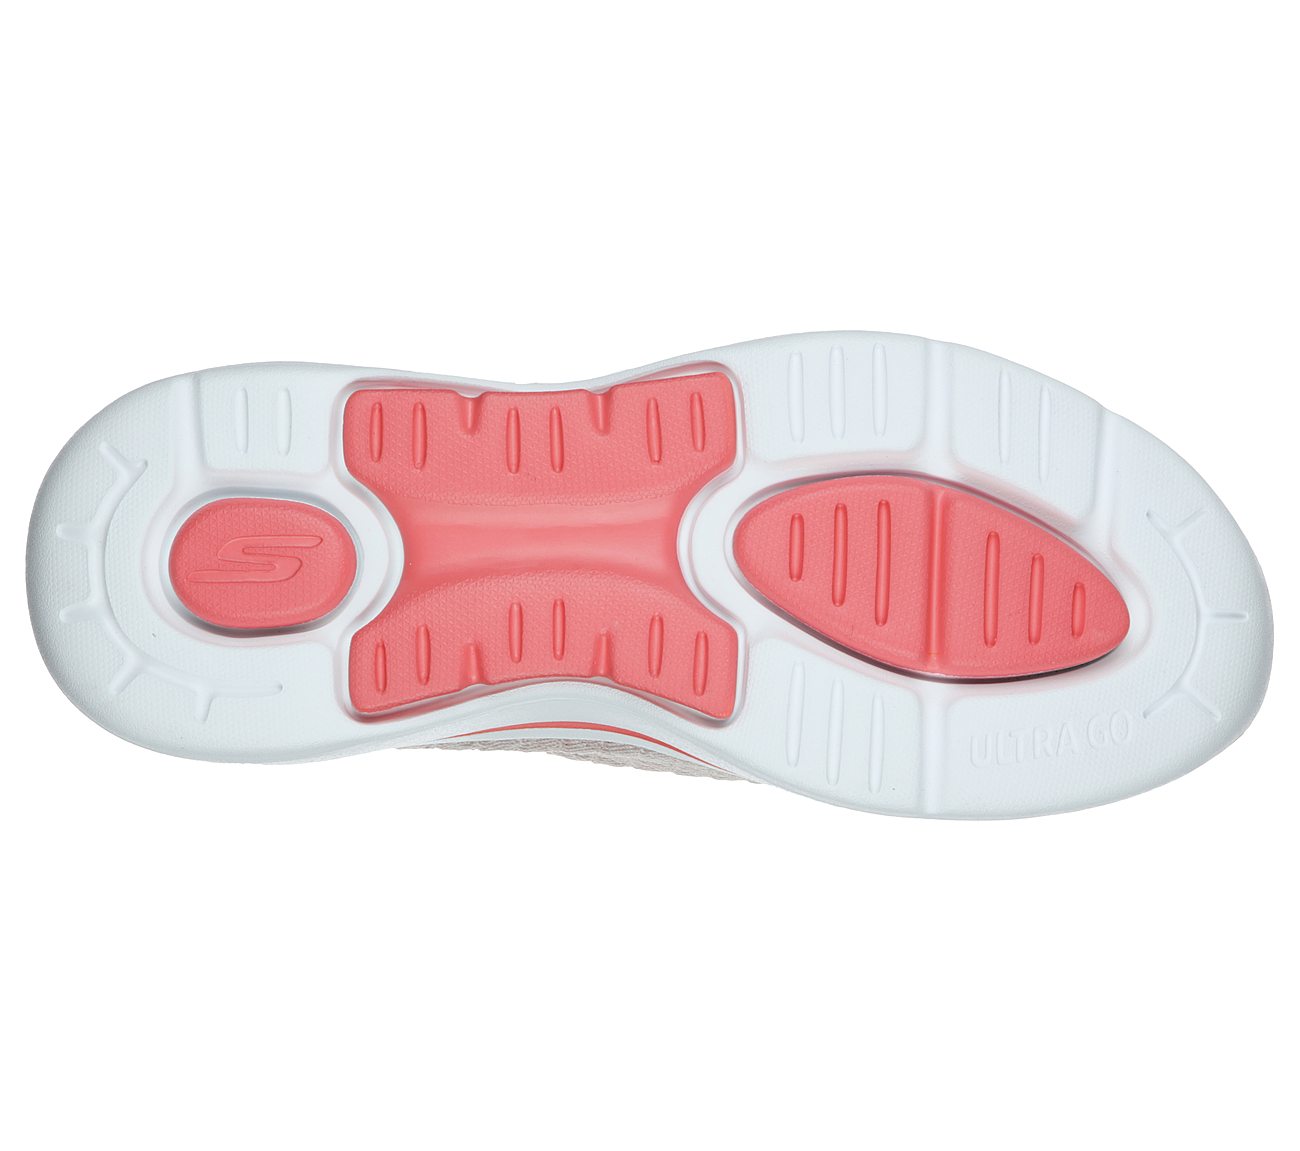 GO WALK ARCH FIT - PEACHY, TAUPE/CORAL Footwear Bottom View